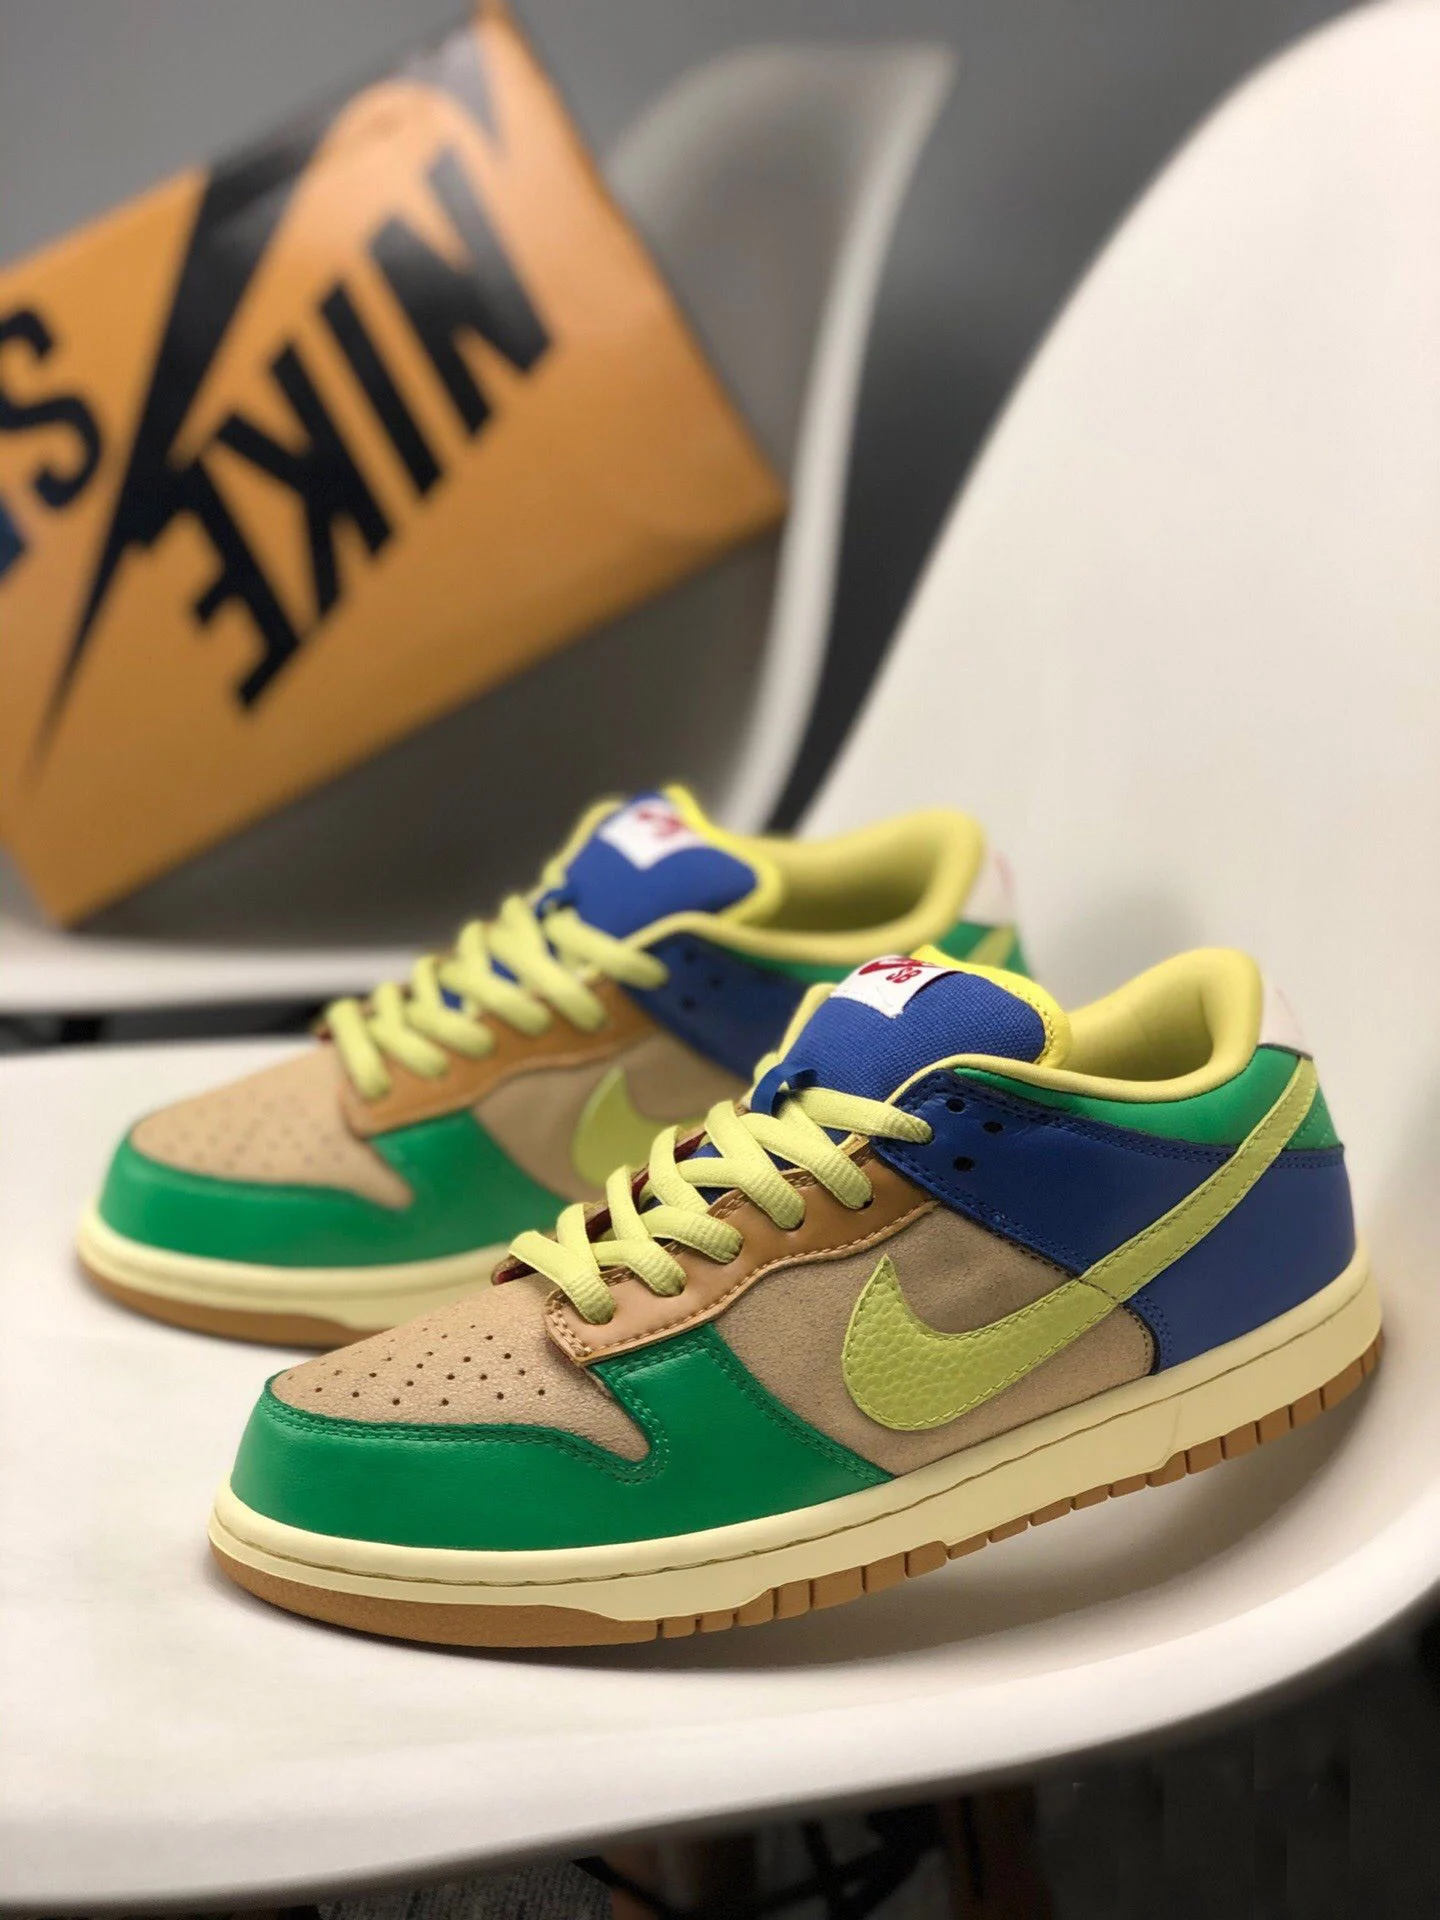 Brooklyn Projects x Nike SB Dunk Low Premium Halo Zitron For Sale